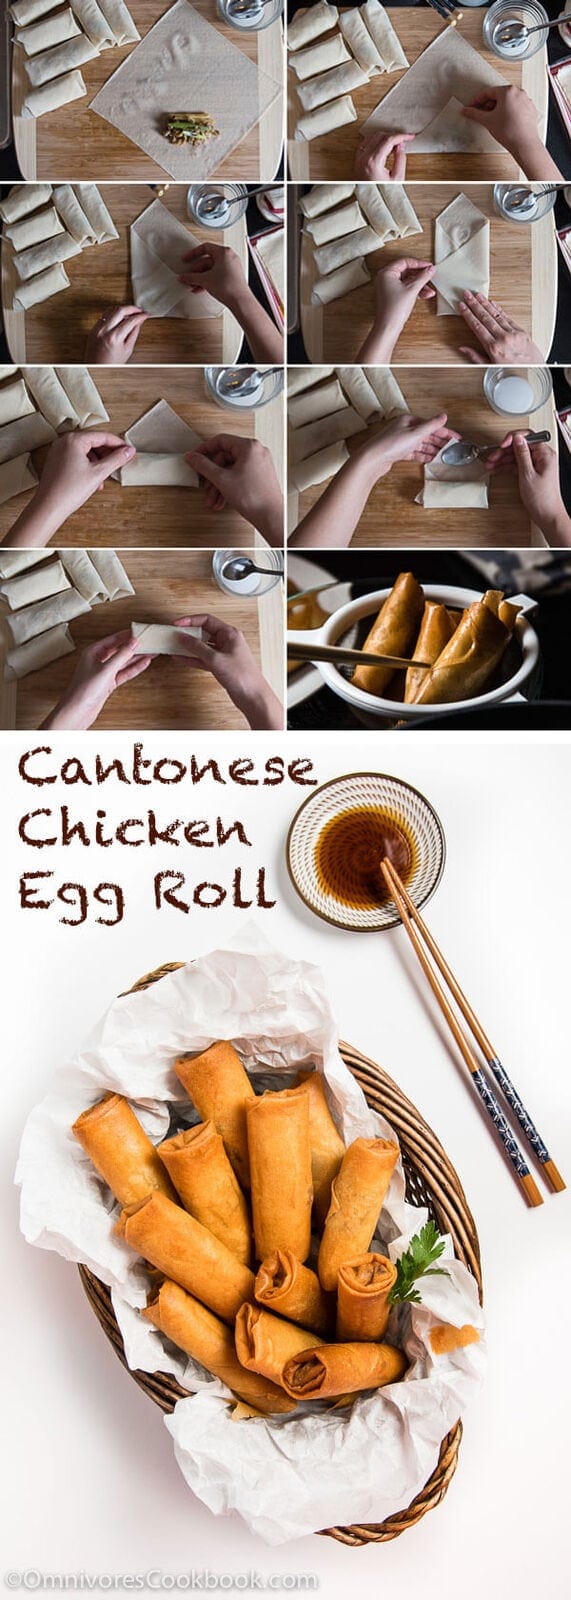 Cantonese Chicken Egg Roll (广式鸡肉春卷) - This recipe is from a famous Hongkongese dim sum chef. A must-try if you’re into real Chinese food. | omnivorescookbook.com